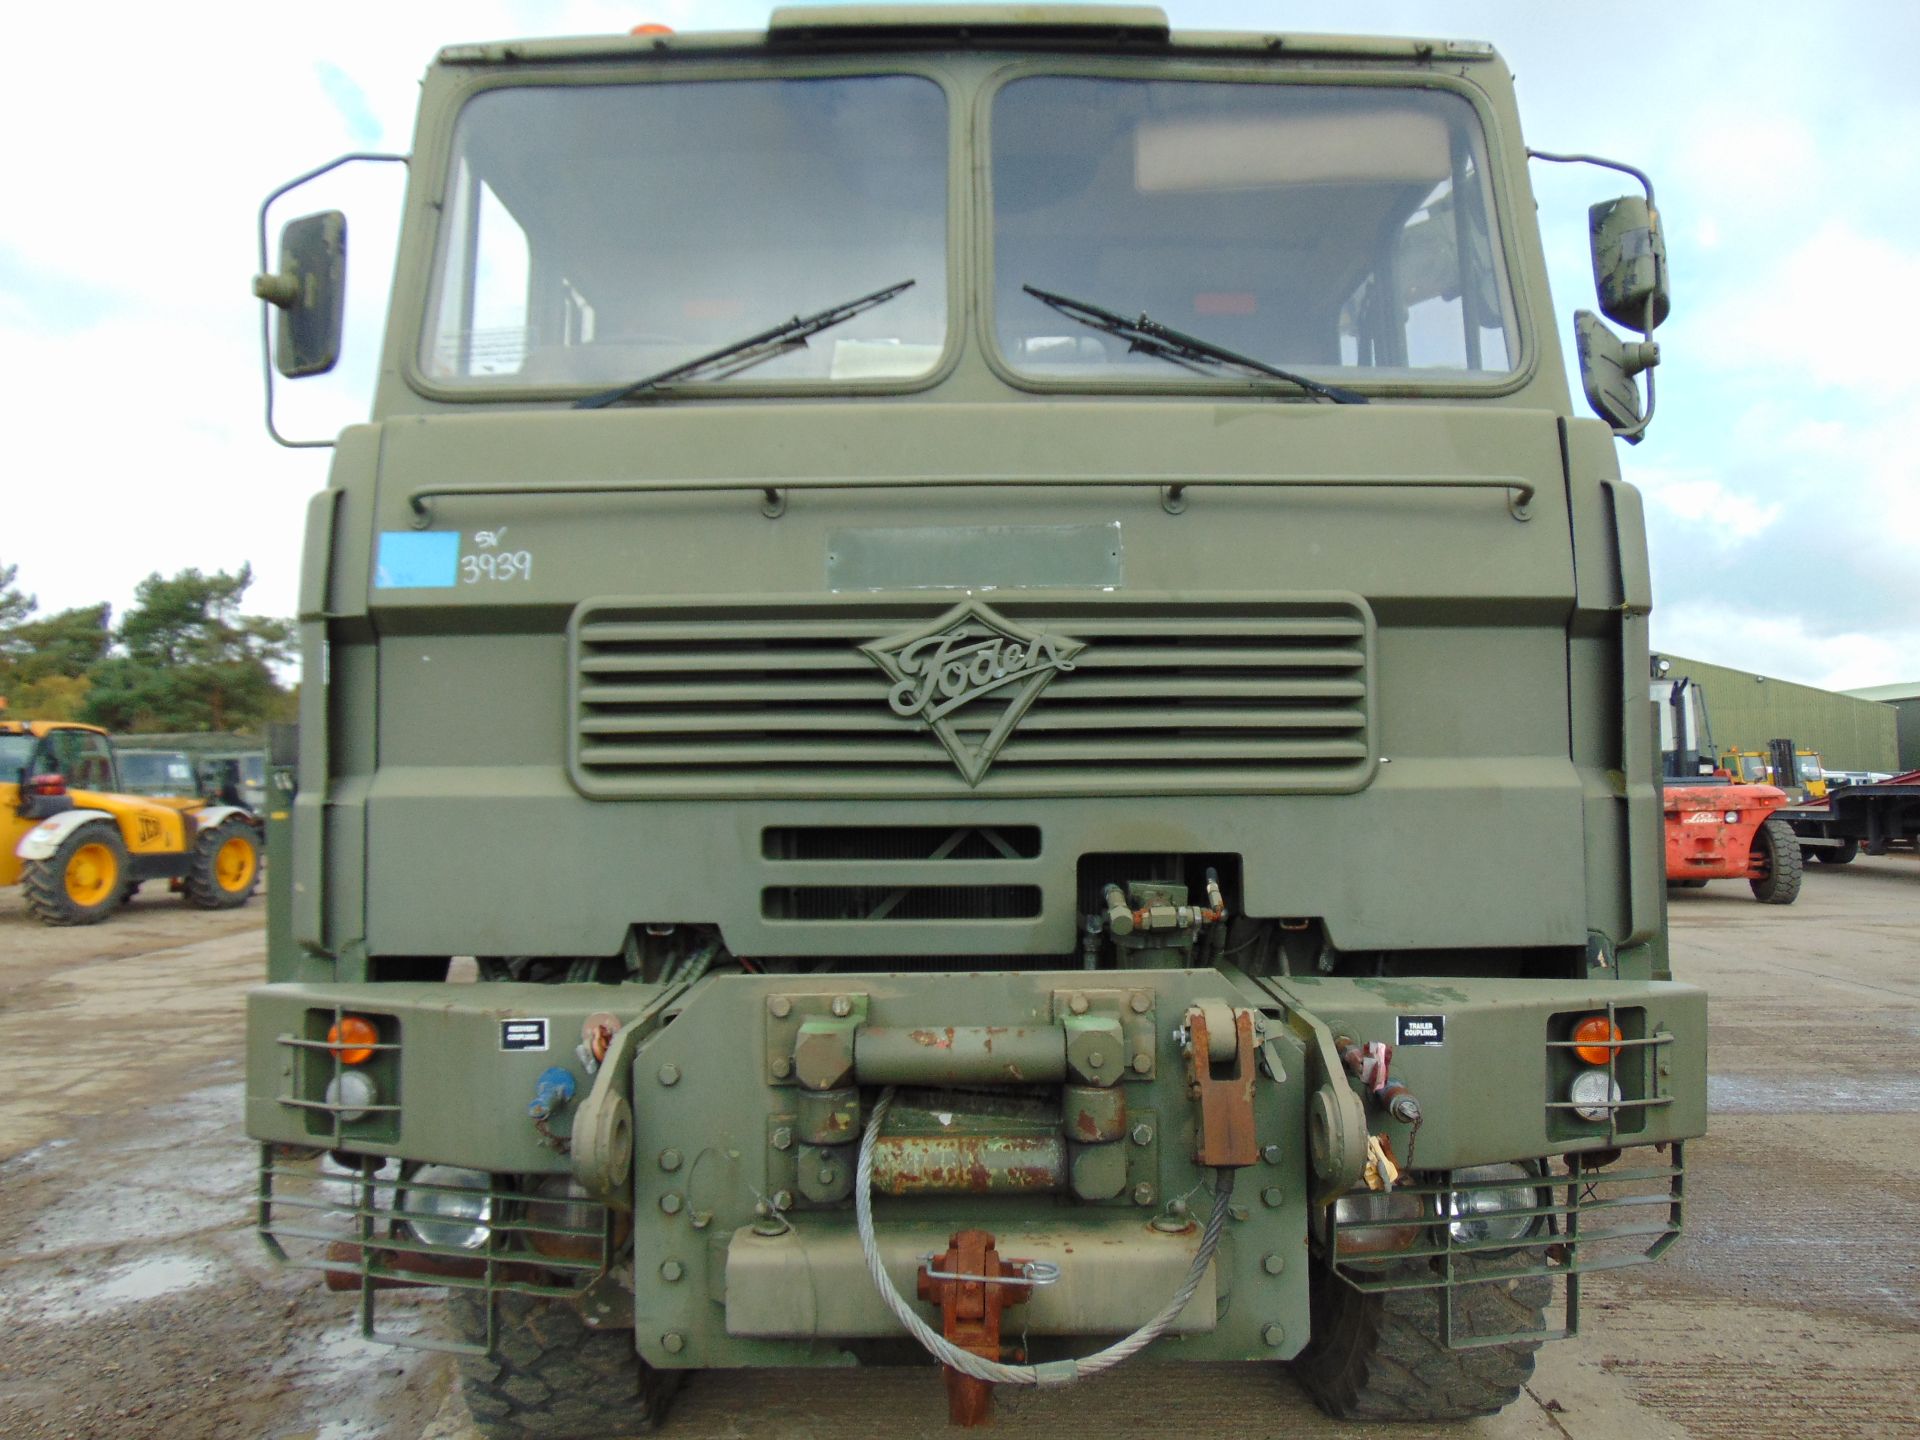 Foden 6x6 Recovery Vehicle which is Complete with Remotes and EKA Recovery Tools - Image 2 of 31